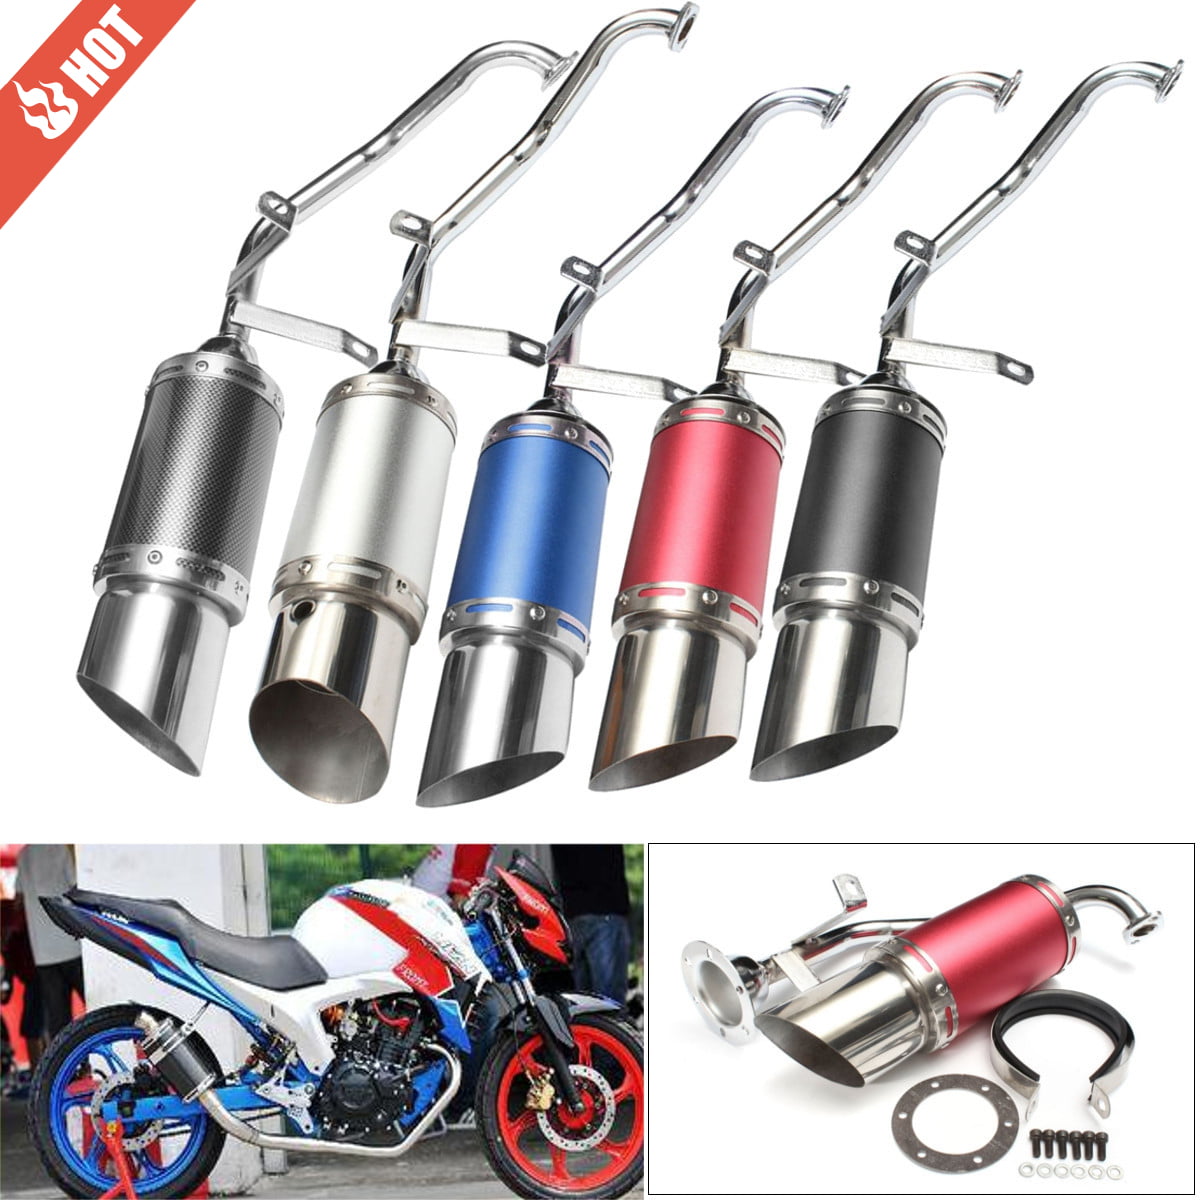 Red Scooter High Performance Exhaust Muffler Pipe Slip On For GY6 50CC Engines